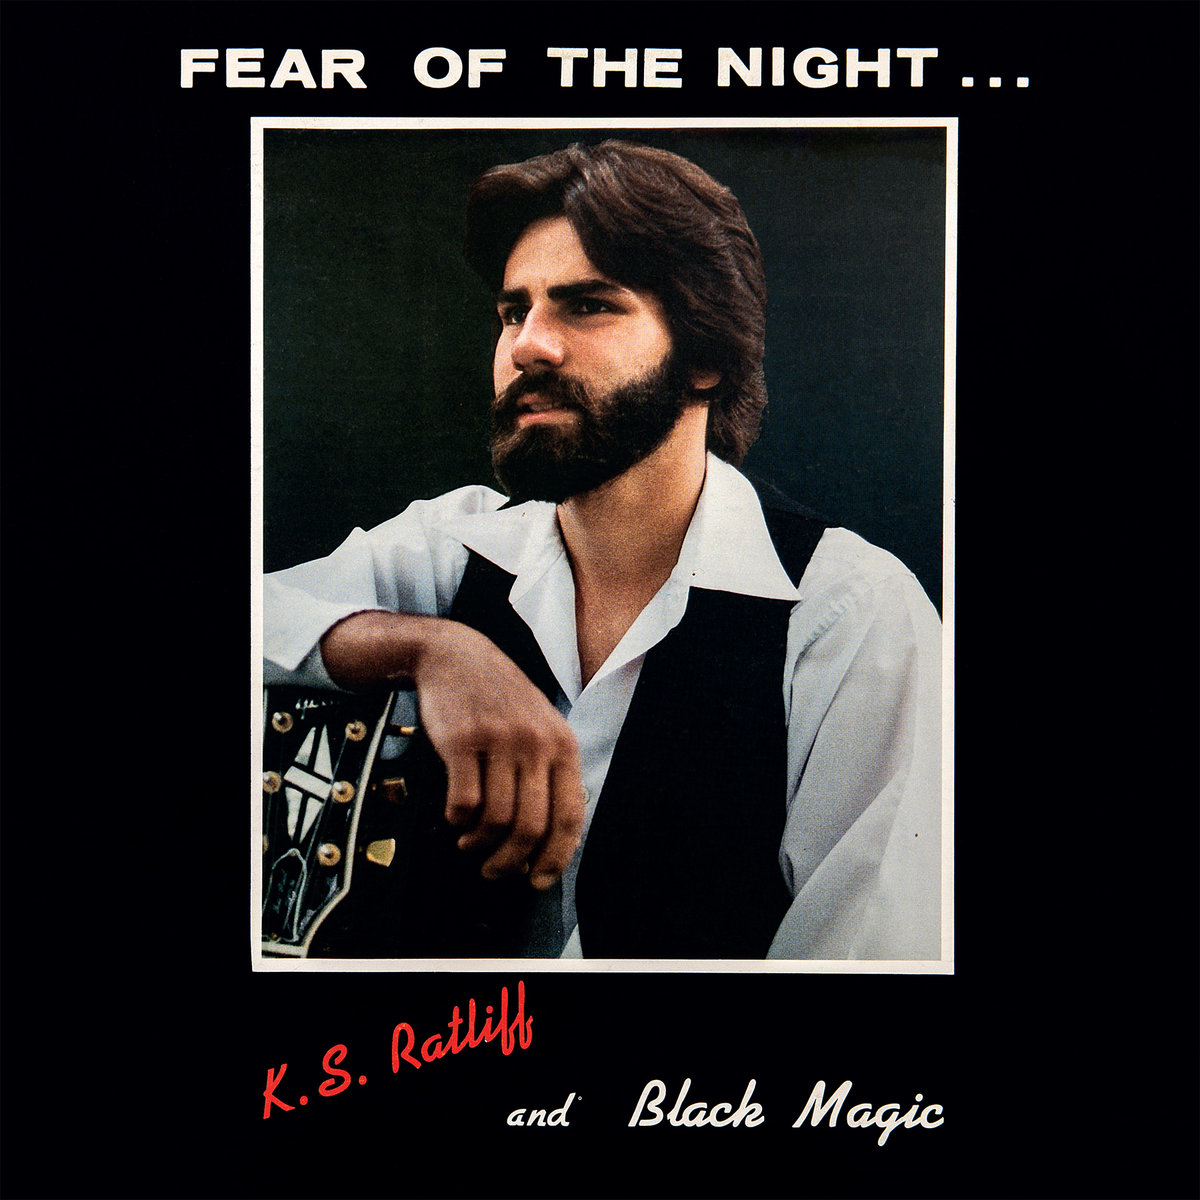 K.S. RATLIFF AND BLACK MAGIC / FEAR OF THE NIGHT (LP)